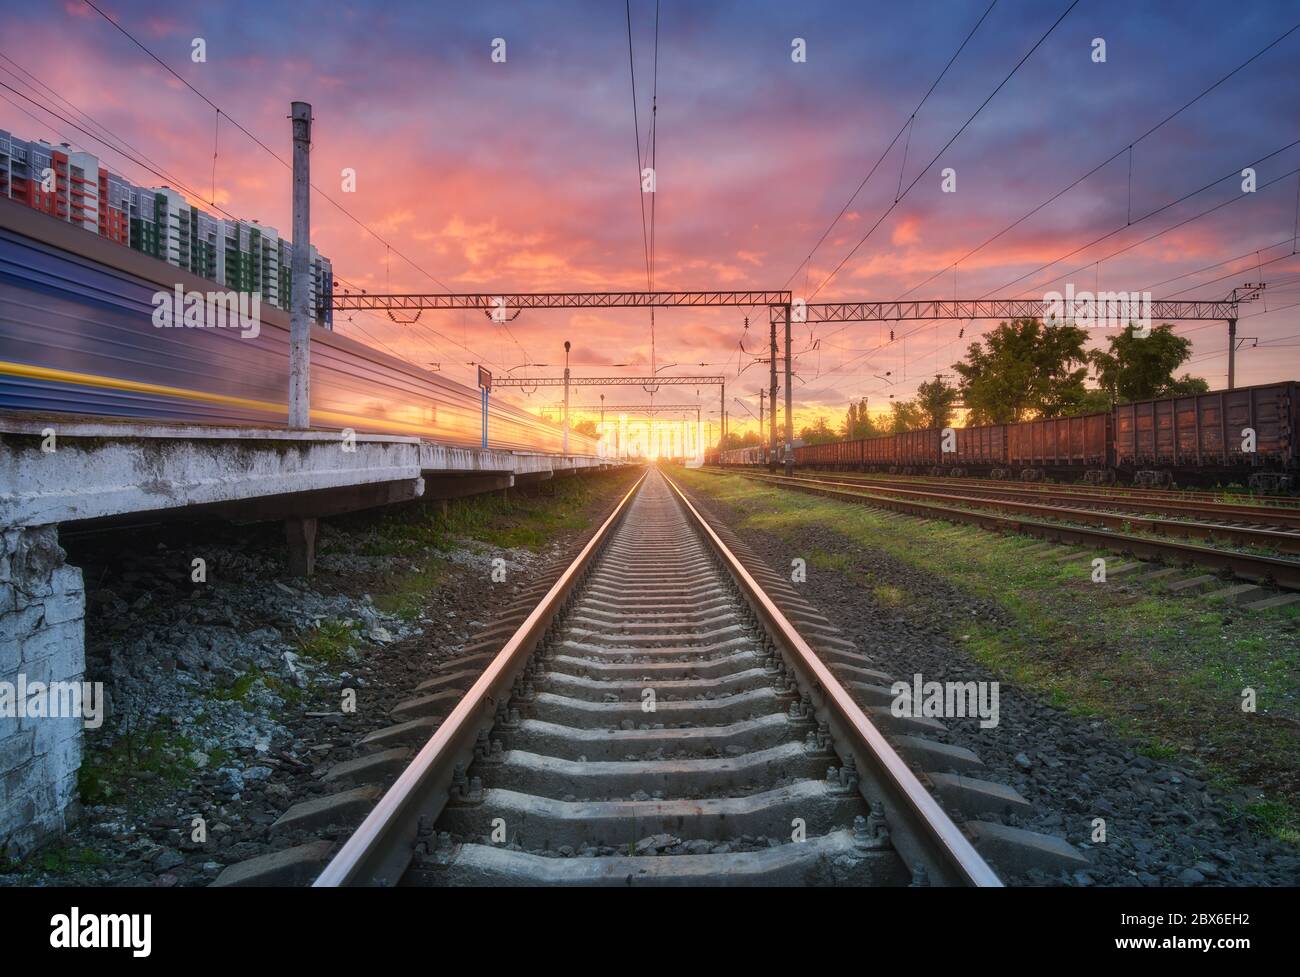 Railway station with freight trains at colorful sunset Stock Photo